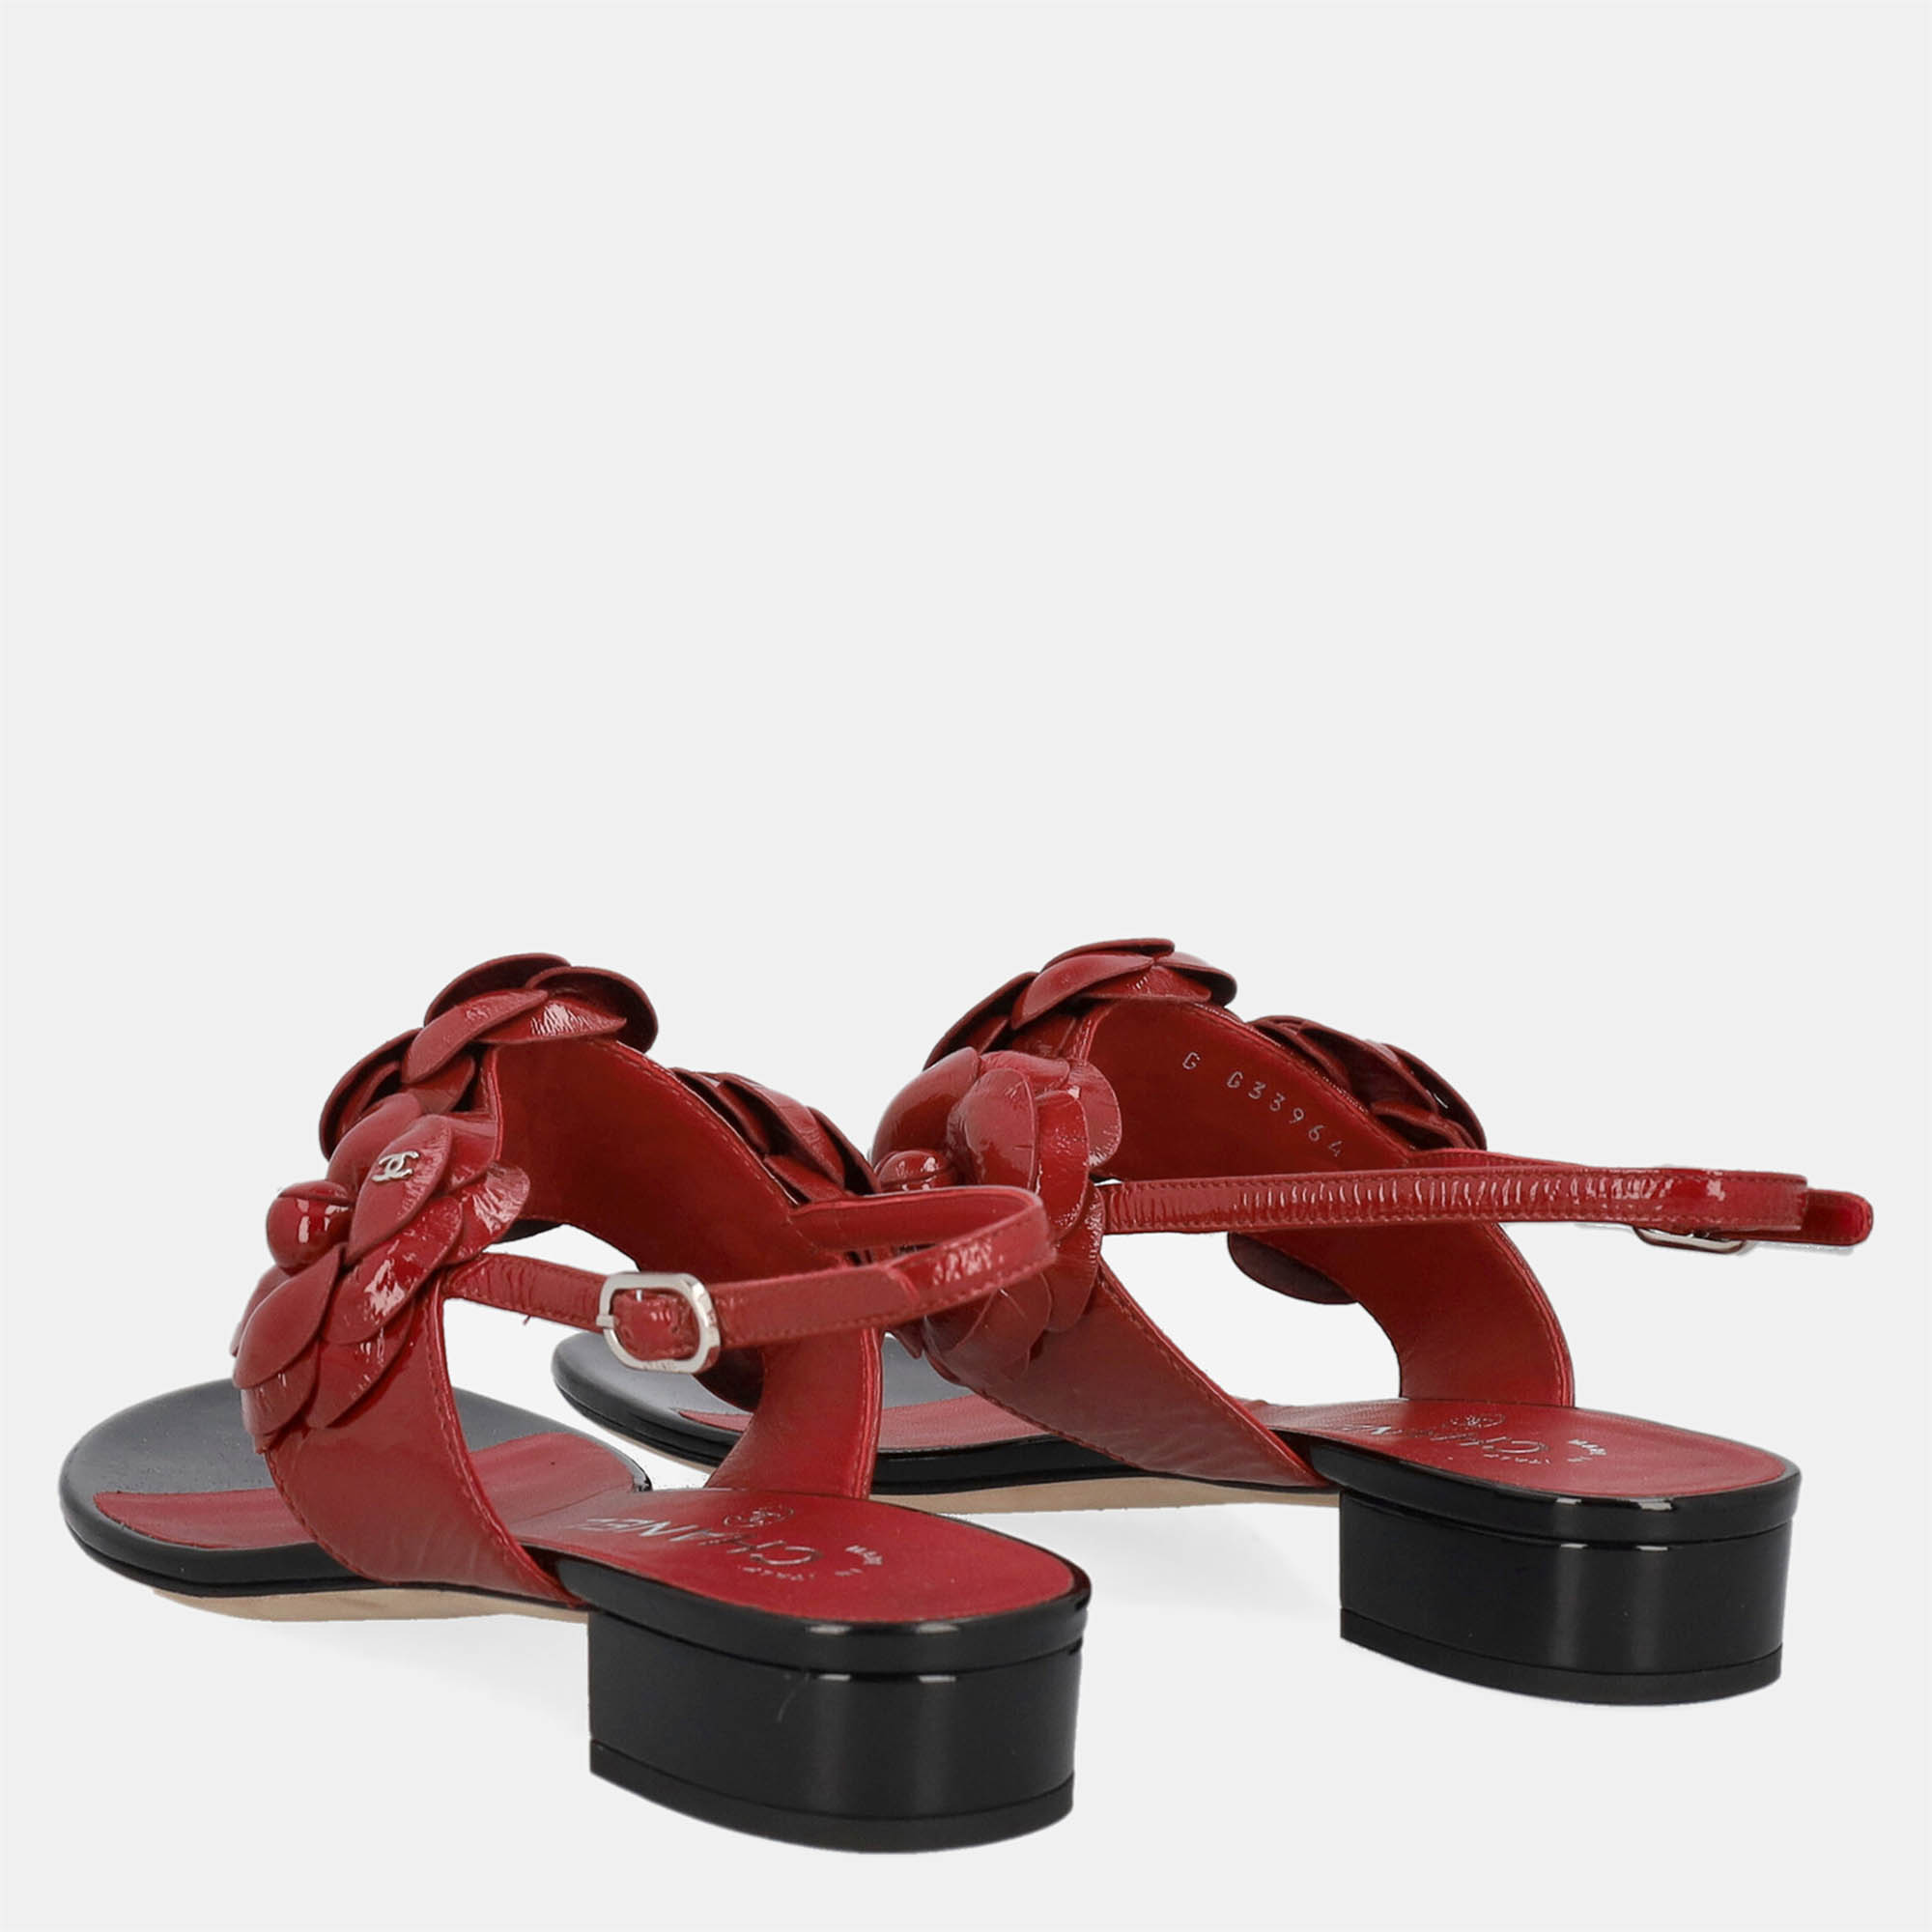 Chanel  Women's Leather Sandals - Red - EU 38.5